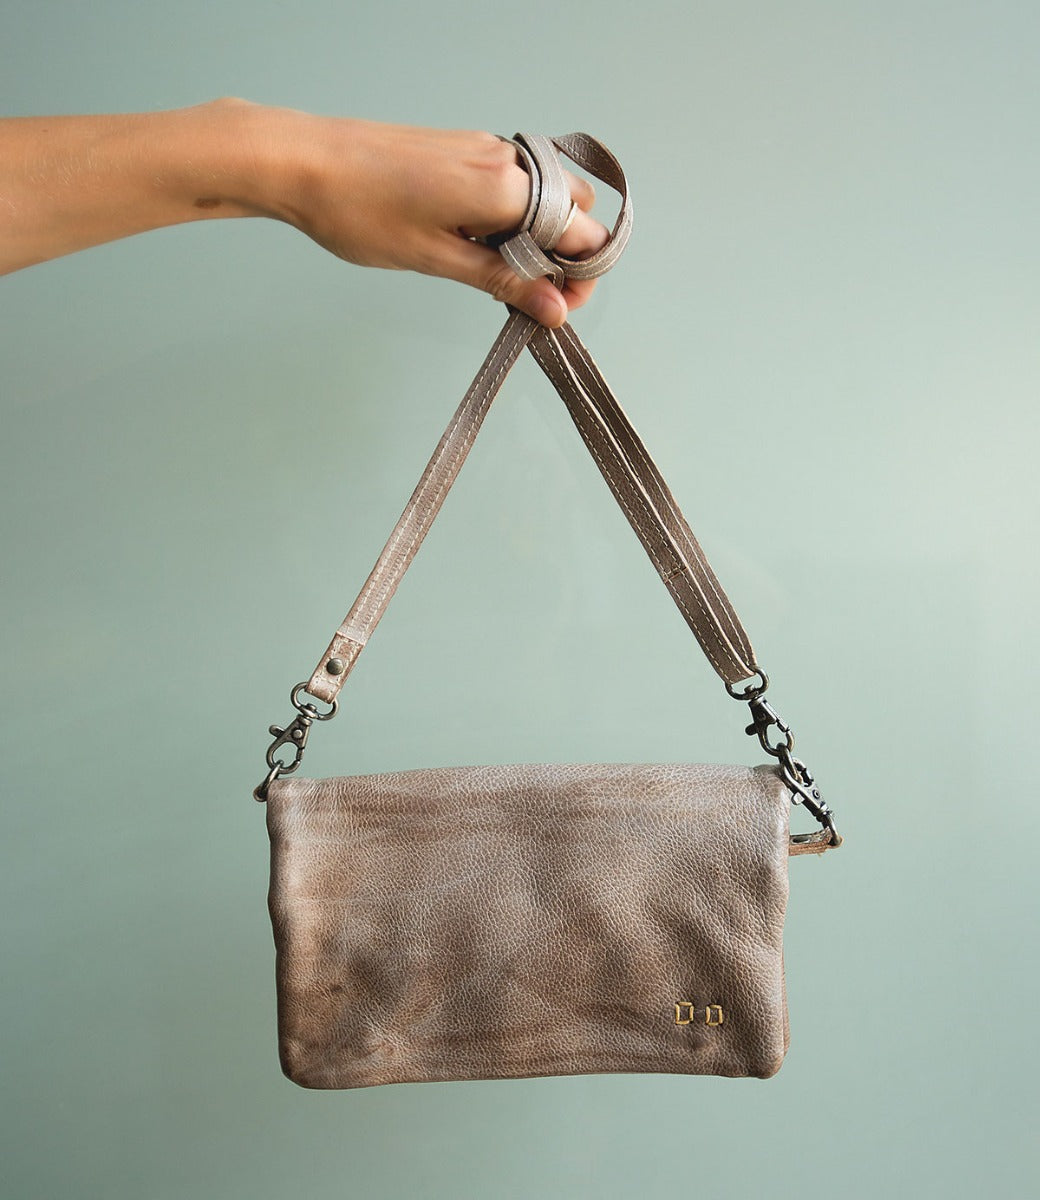 A hand holding a Cadence crossbody bag by Bed Stu.